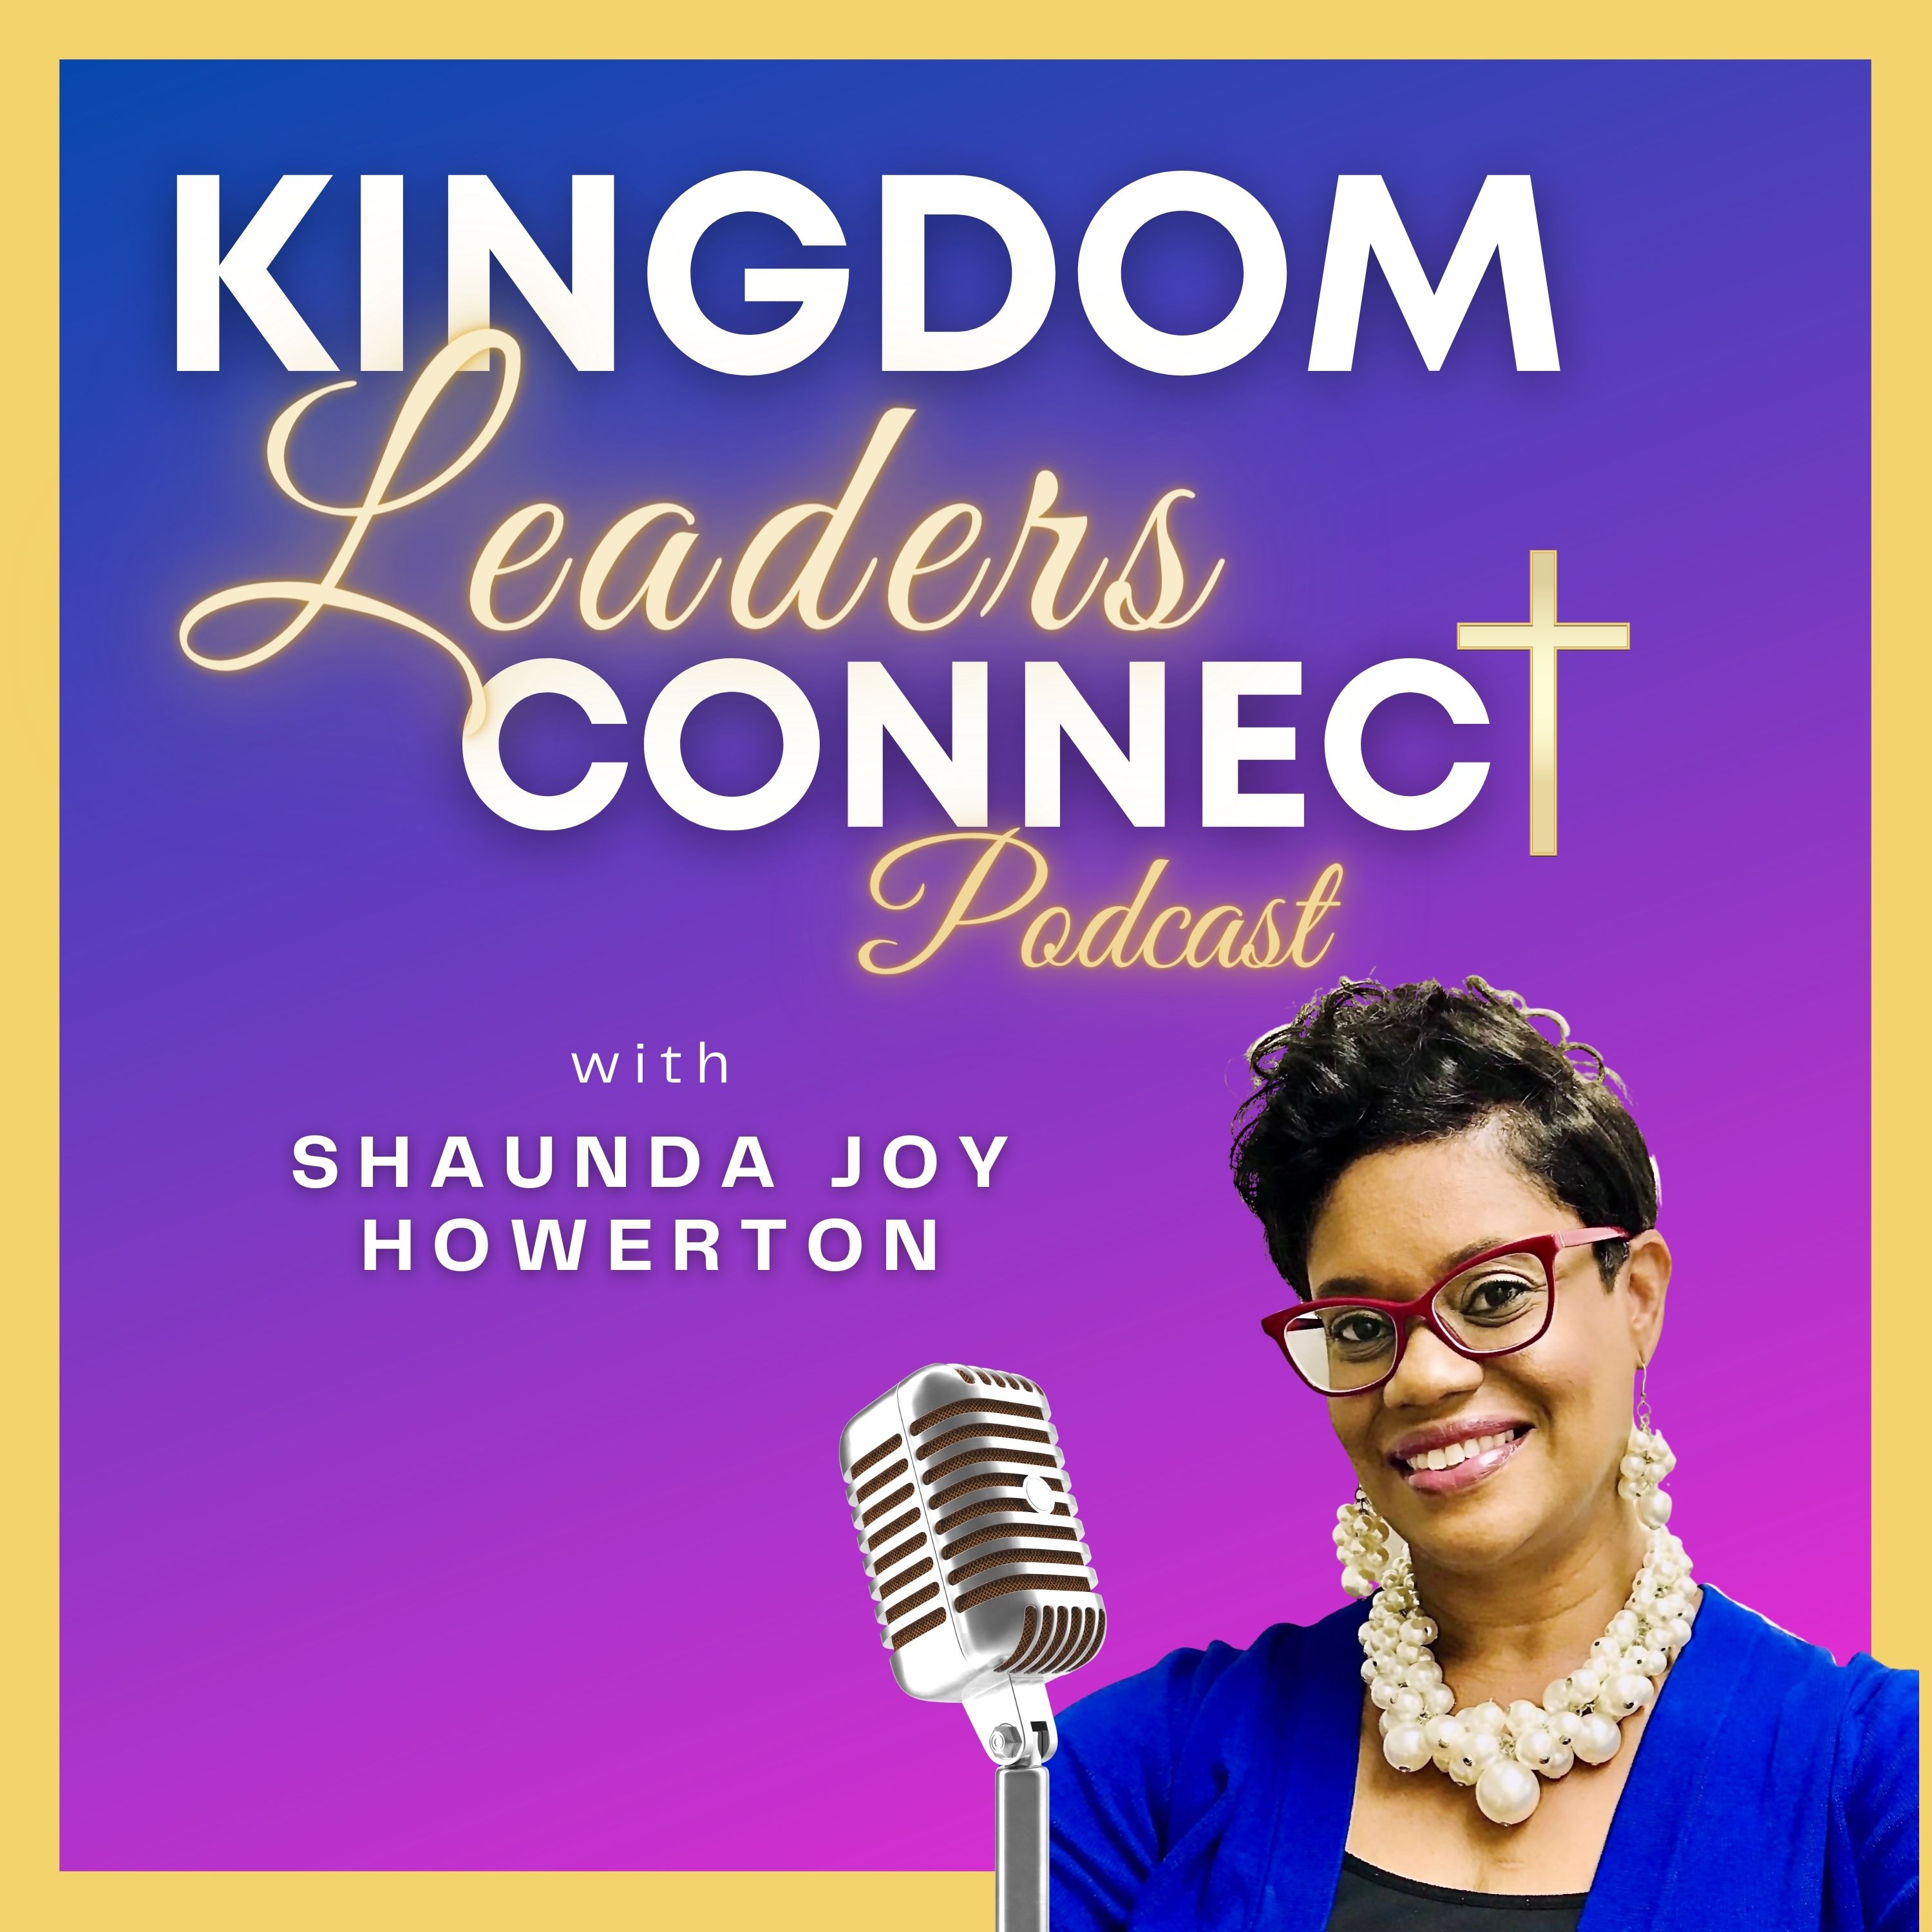 Artwork for Kingdom Leaders Connect